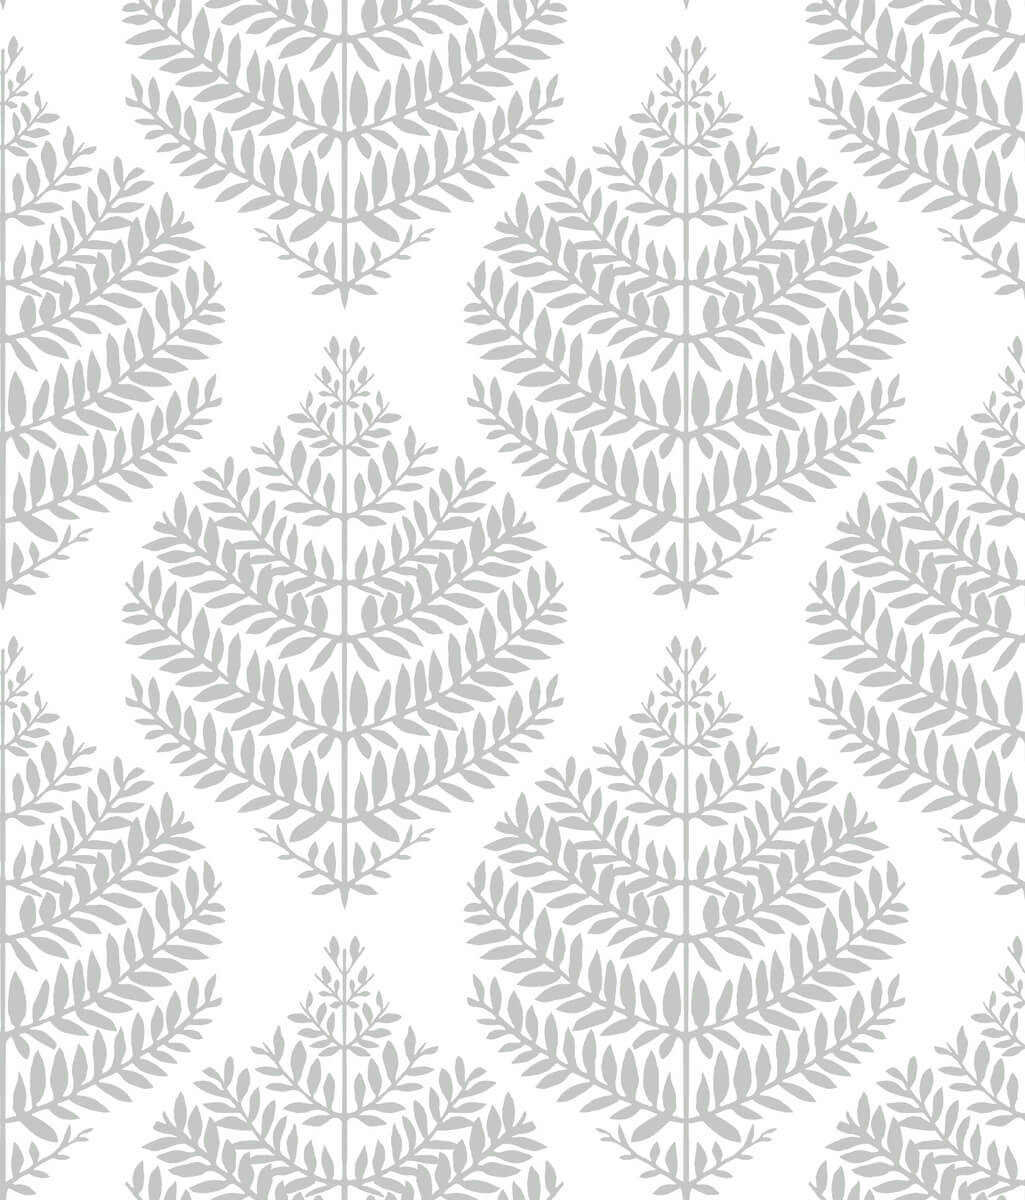 Hygge Fern Damask Peel and Stick Wallpaper - SAMPLE ONLY